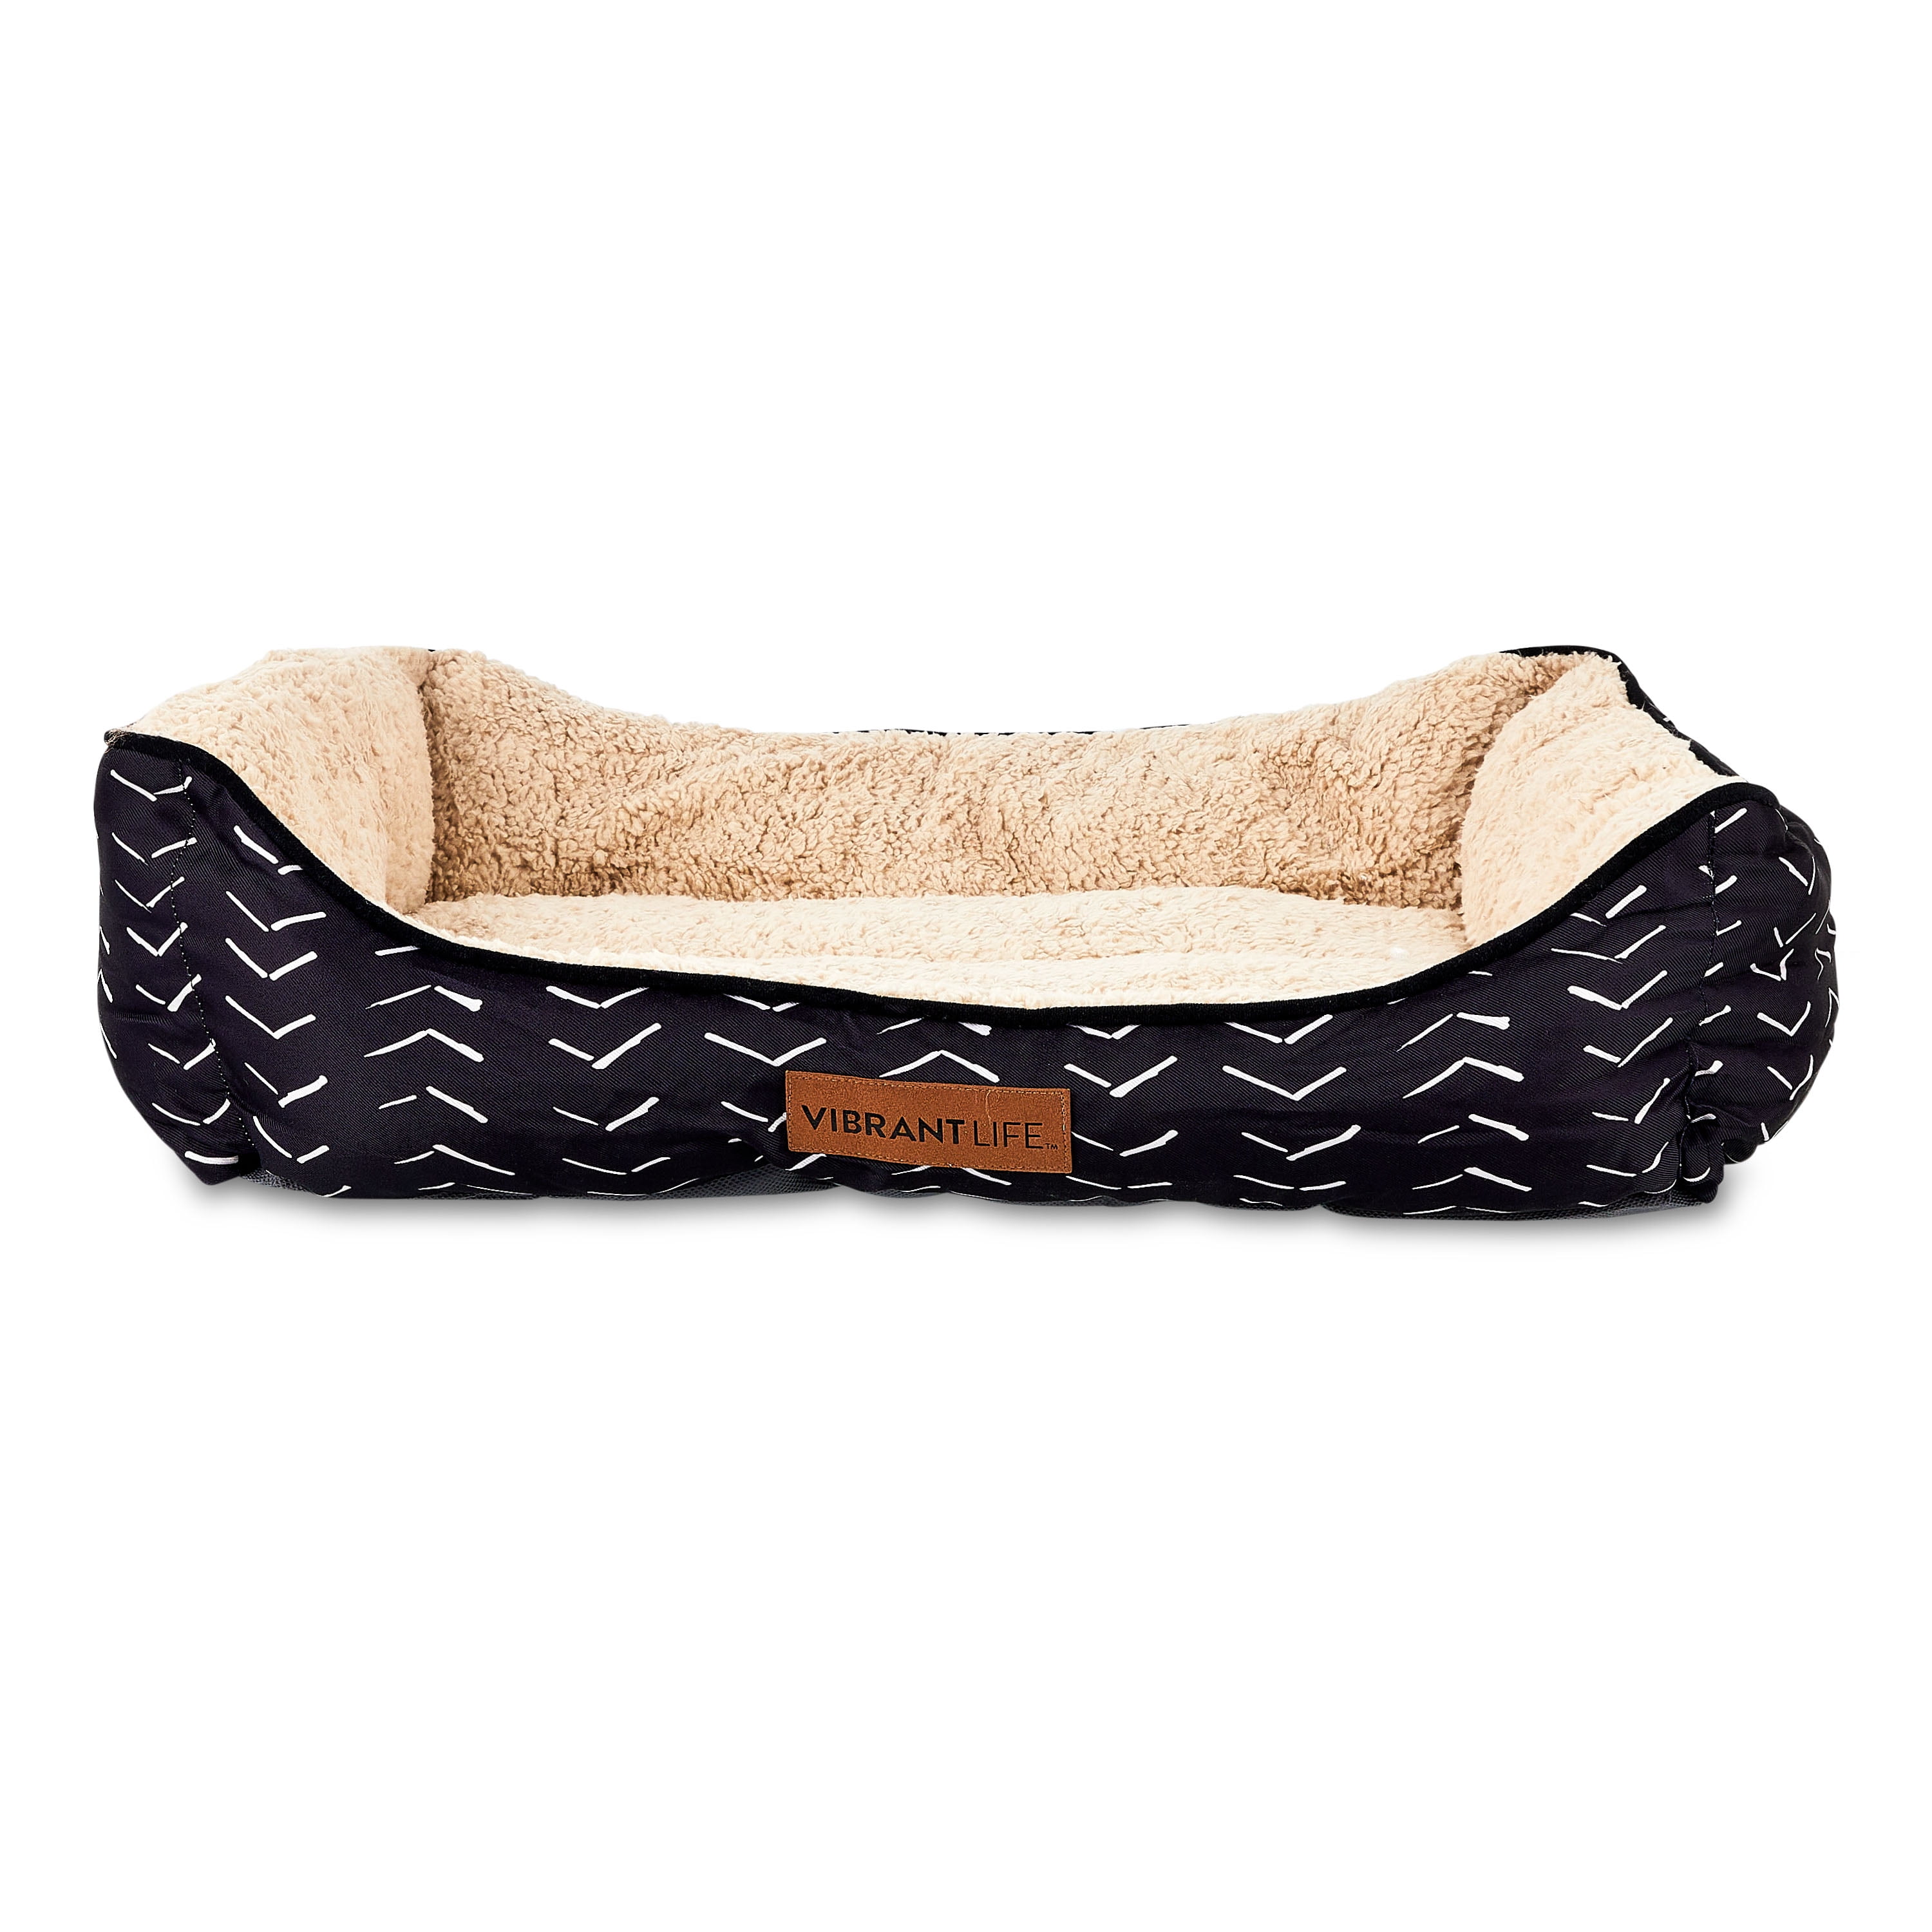 Vibrant Life Luxe Cuddler Mattress Edition Dog Bed, Medium, 27 inchx21 inch, Up to 40lbs, Size: 27 inch x 21 inch x 7 inch